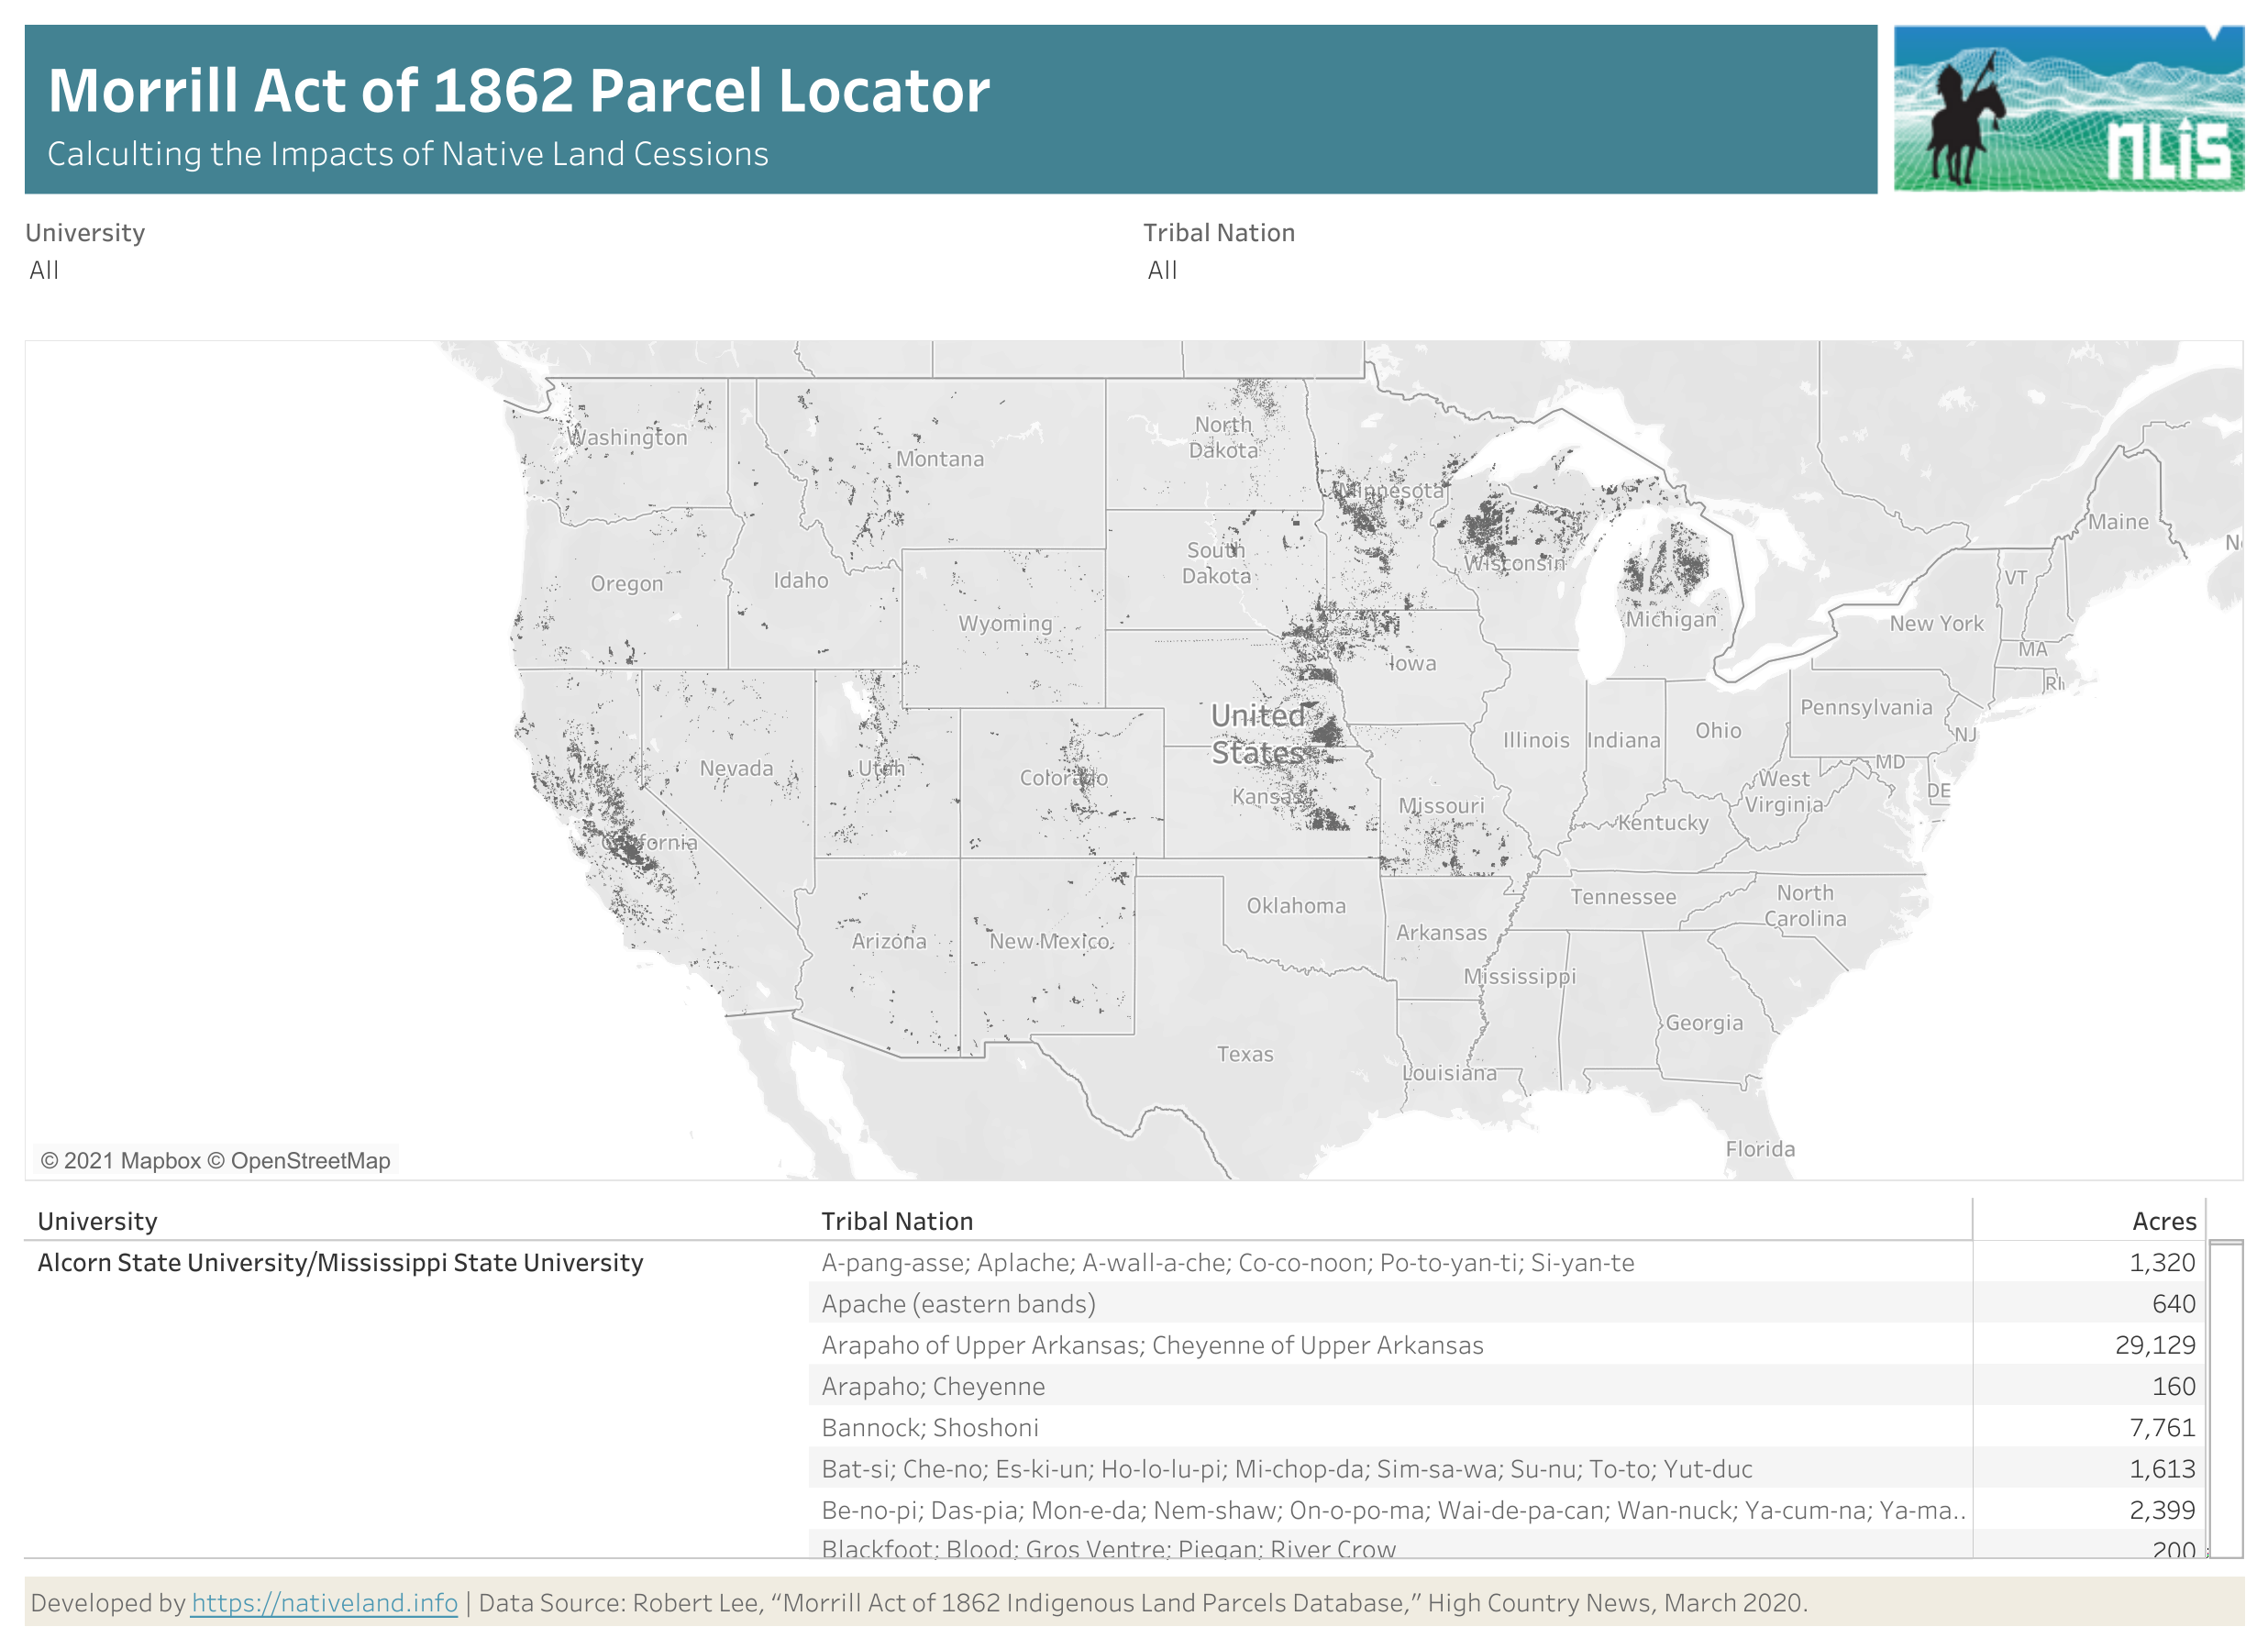 Morrill Act of 1862 Parcel Locator Dashboard